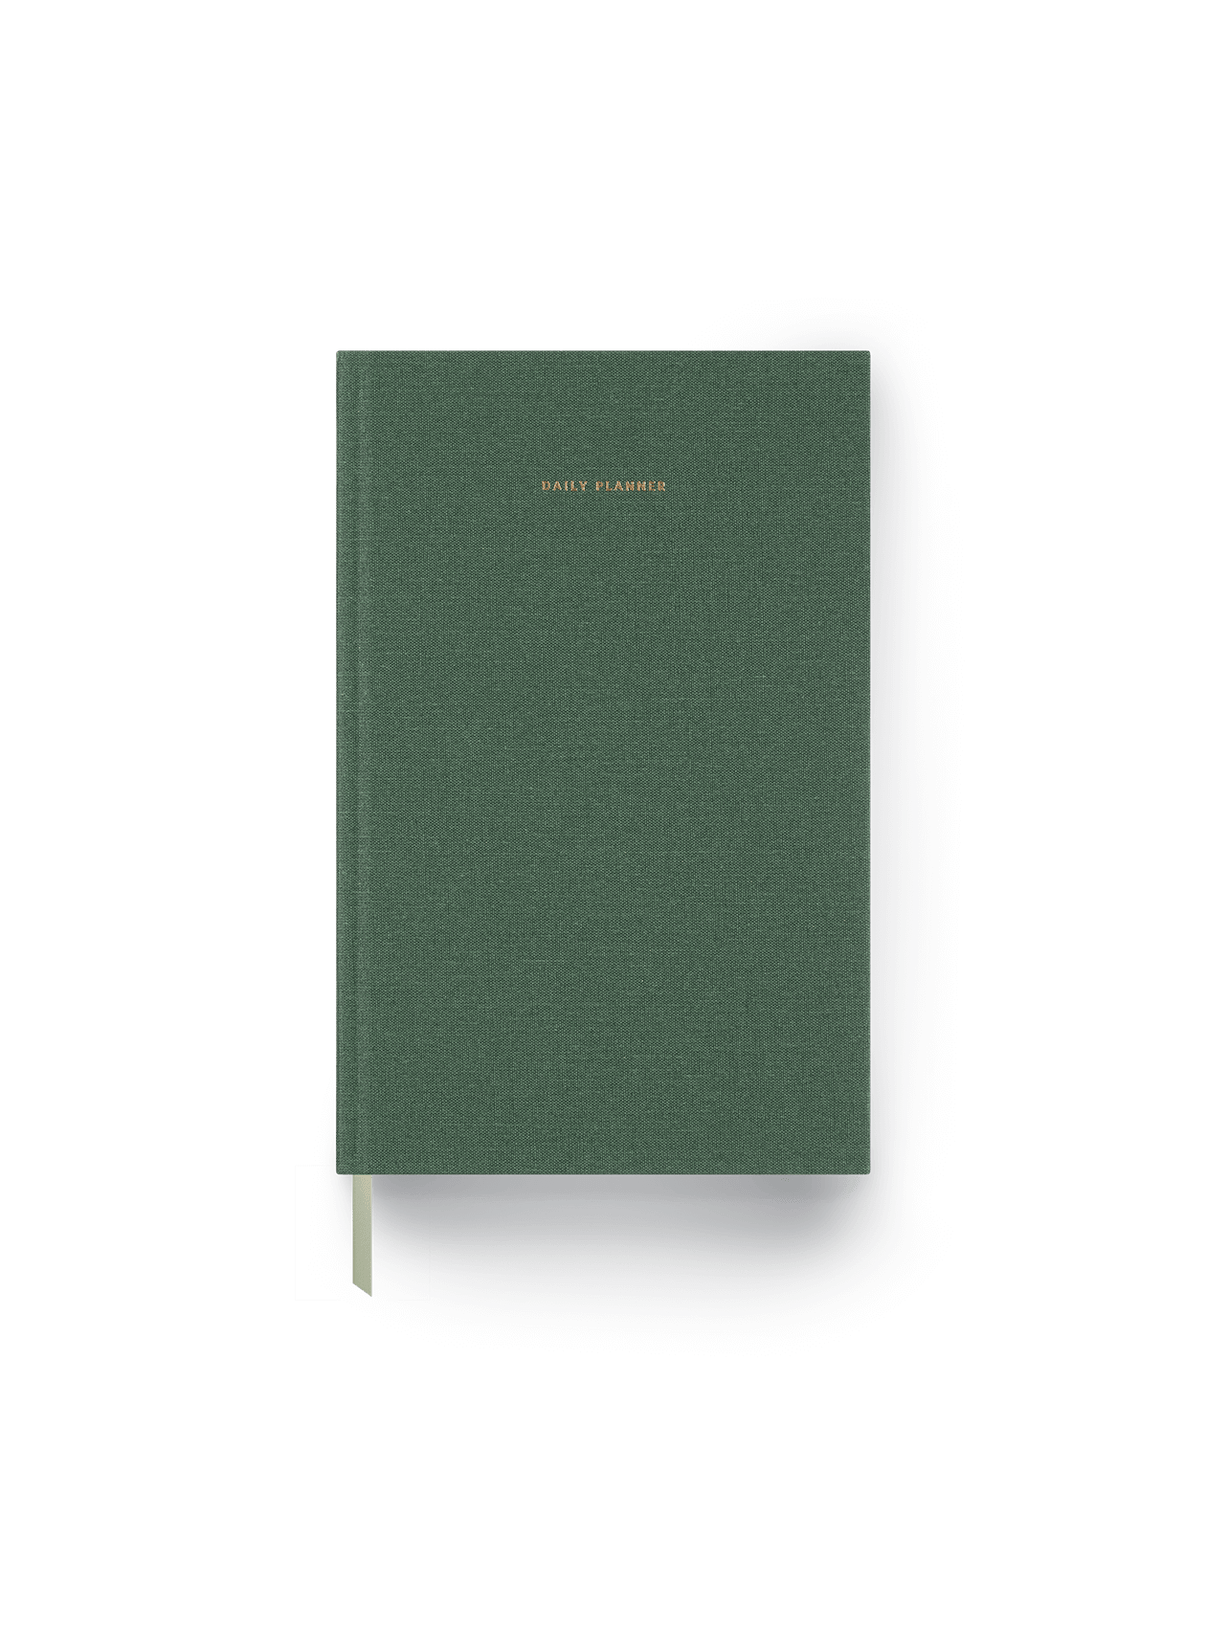 The Appointed 23-24 Daily Planner in Charcoal Gray with casebound hardcover and gold foil details || Fern Green